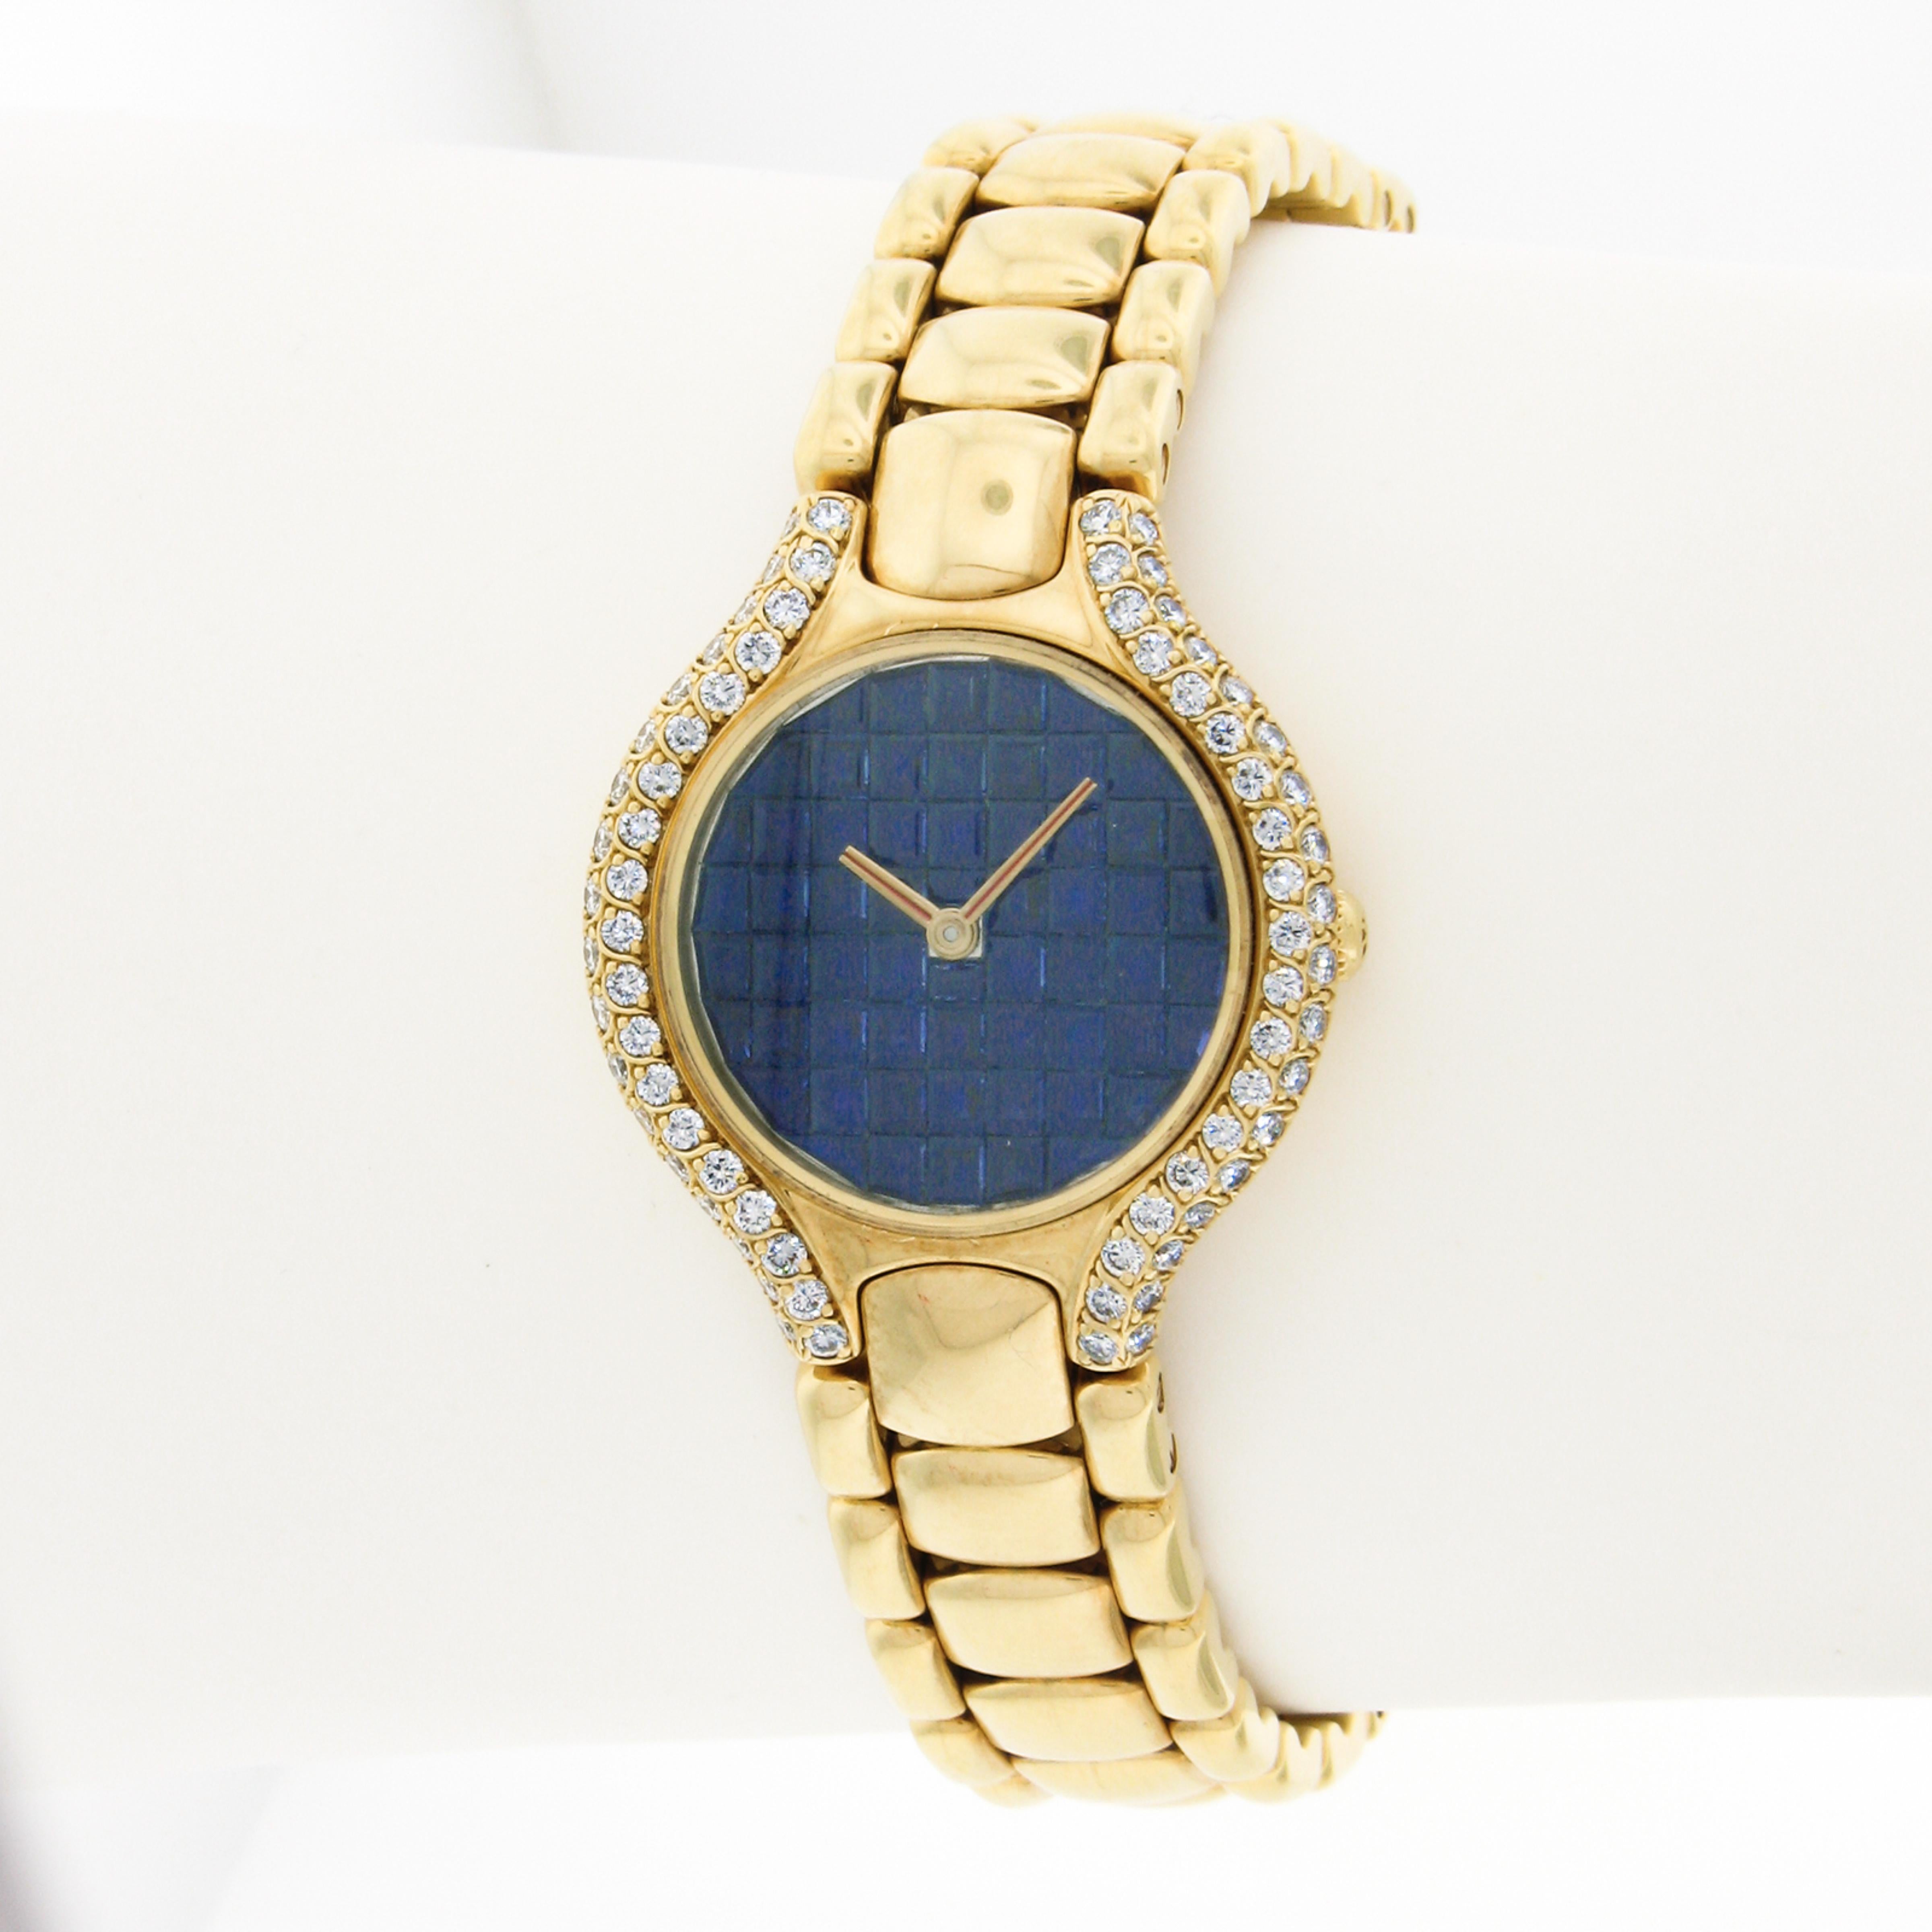 This rare and very well-made ladies' Ebel Beluga wrist watch features a 24mm solid 18k yellow gold round shaped case encrusted with outstandingly fine quality diamonds throughout totaling approximately 1.11 carats in weight. The super unique and